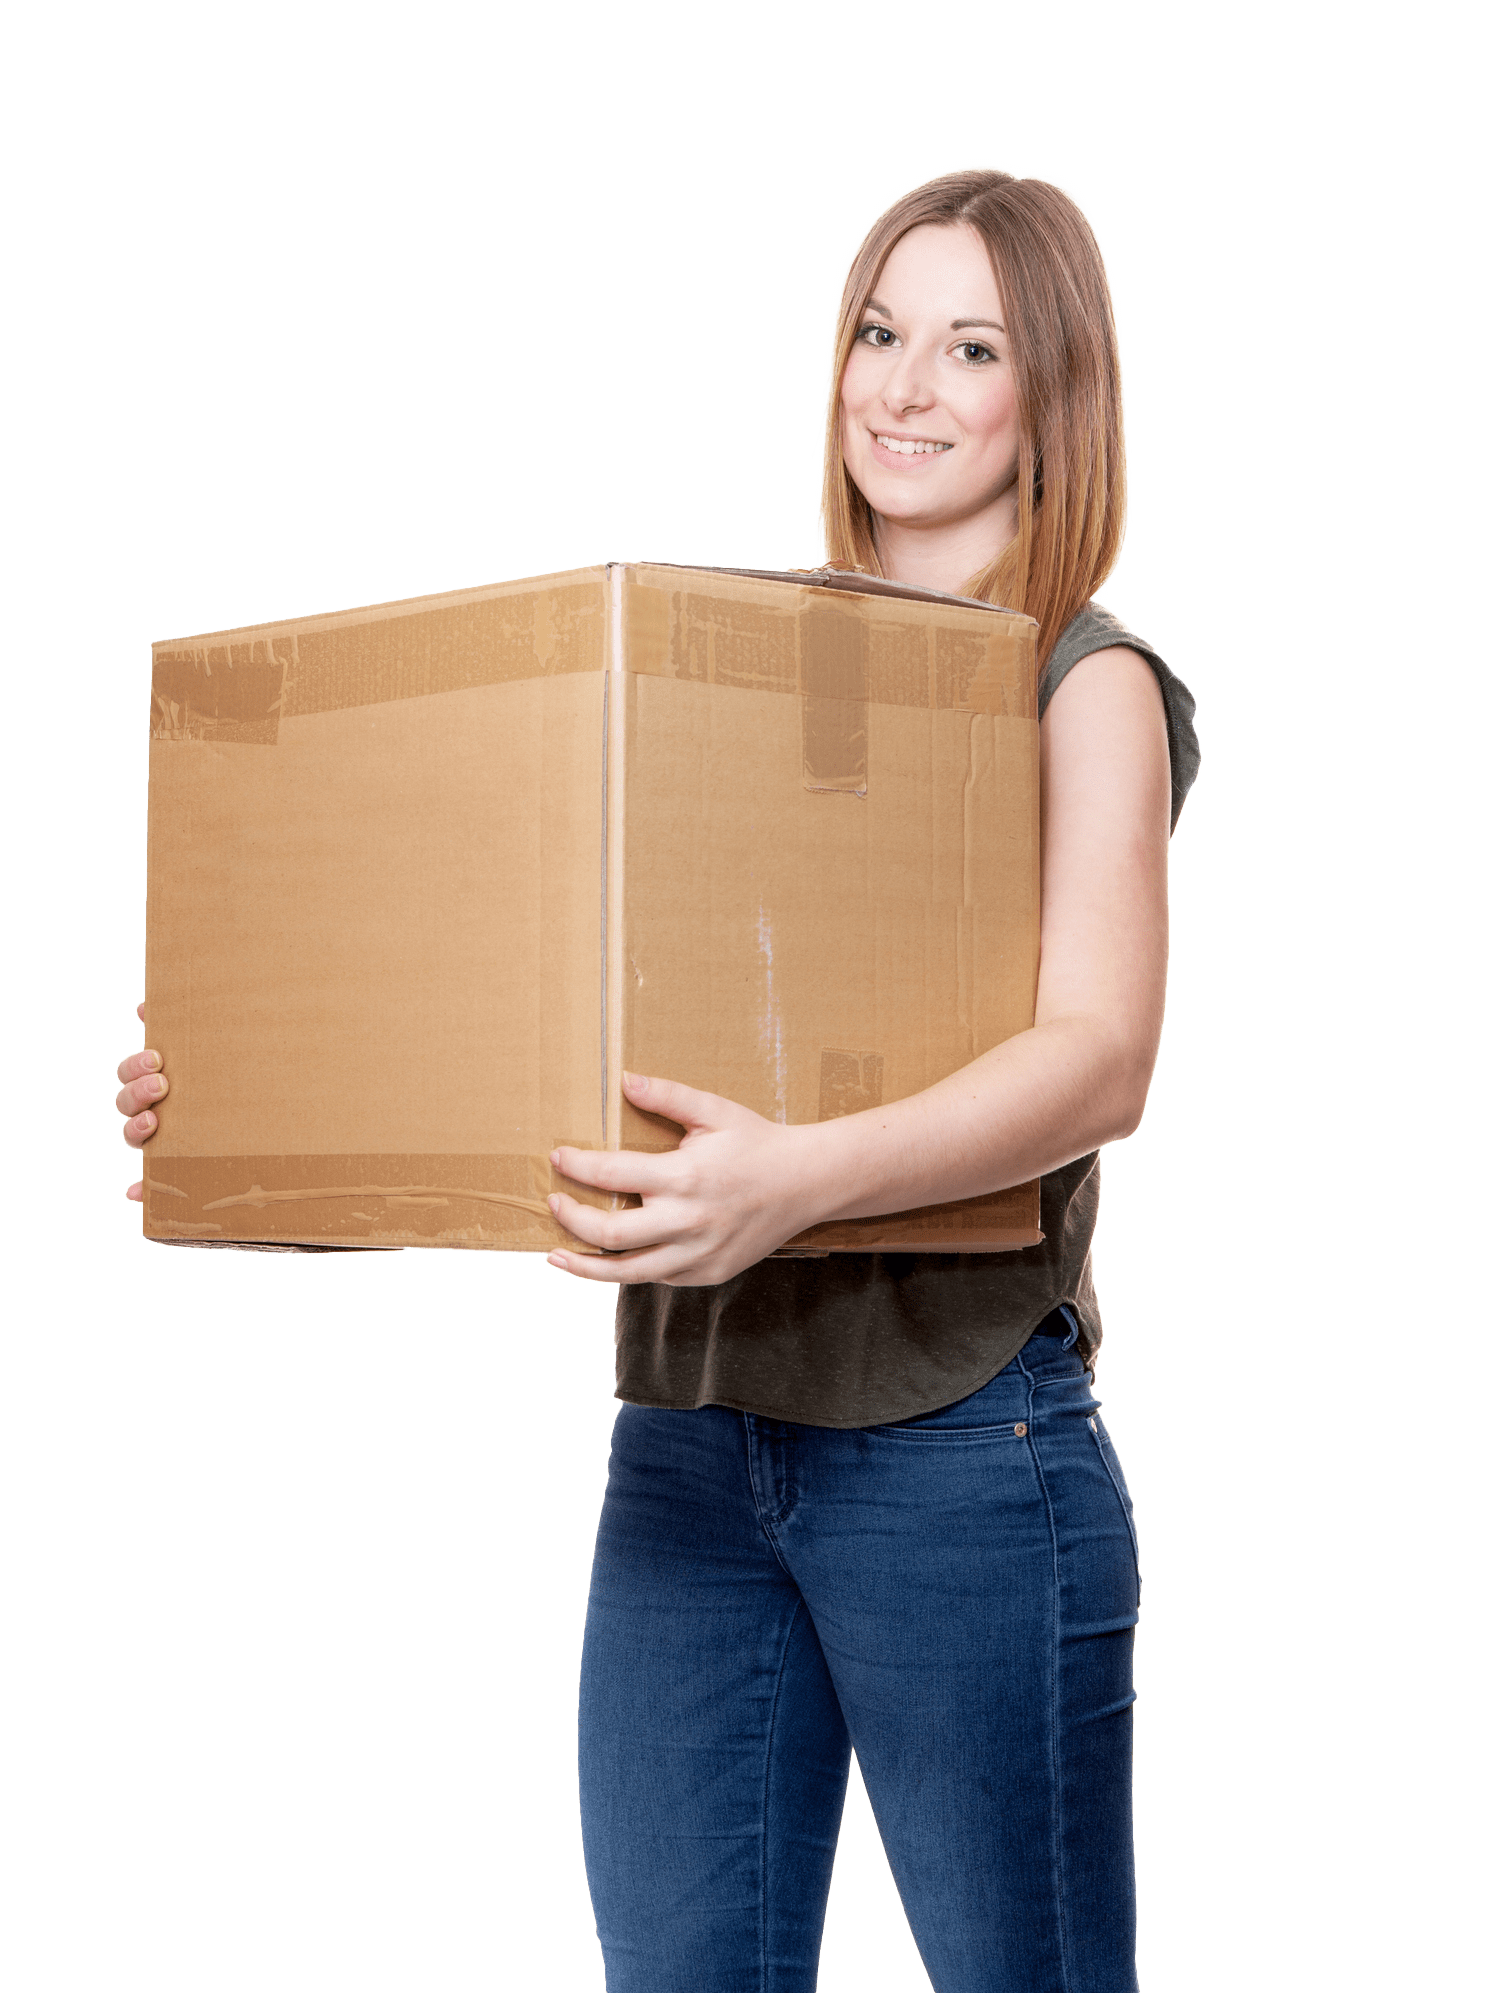 A woman carrying a large box